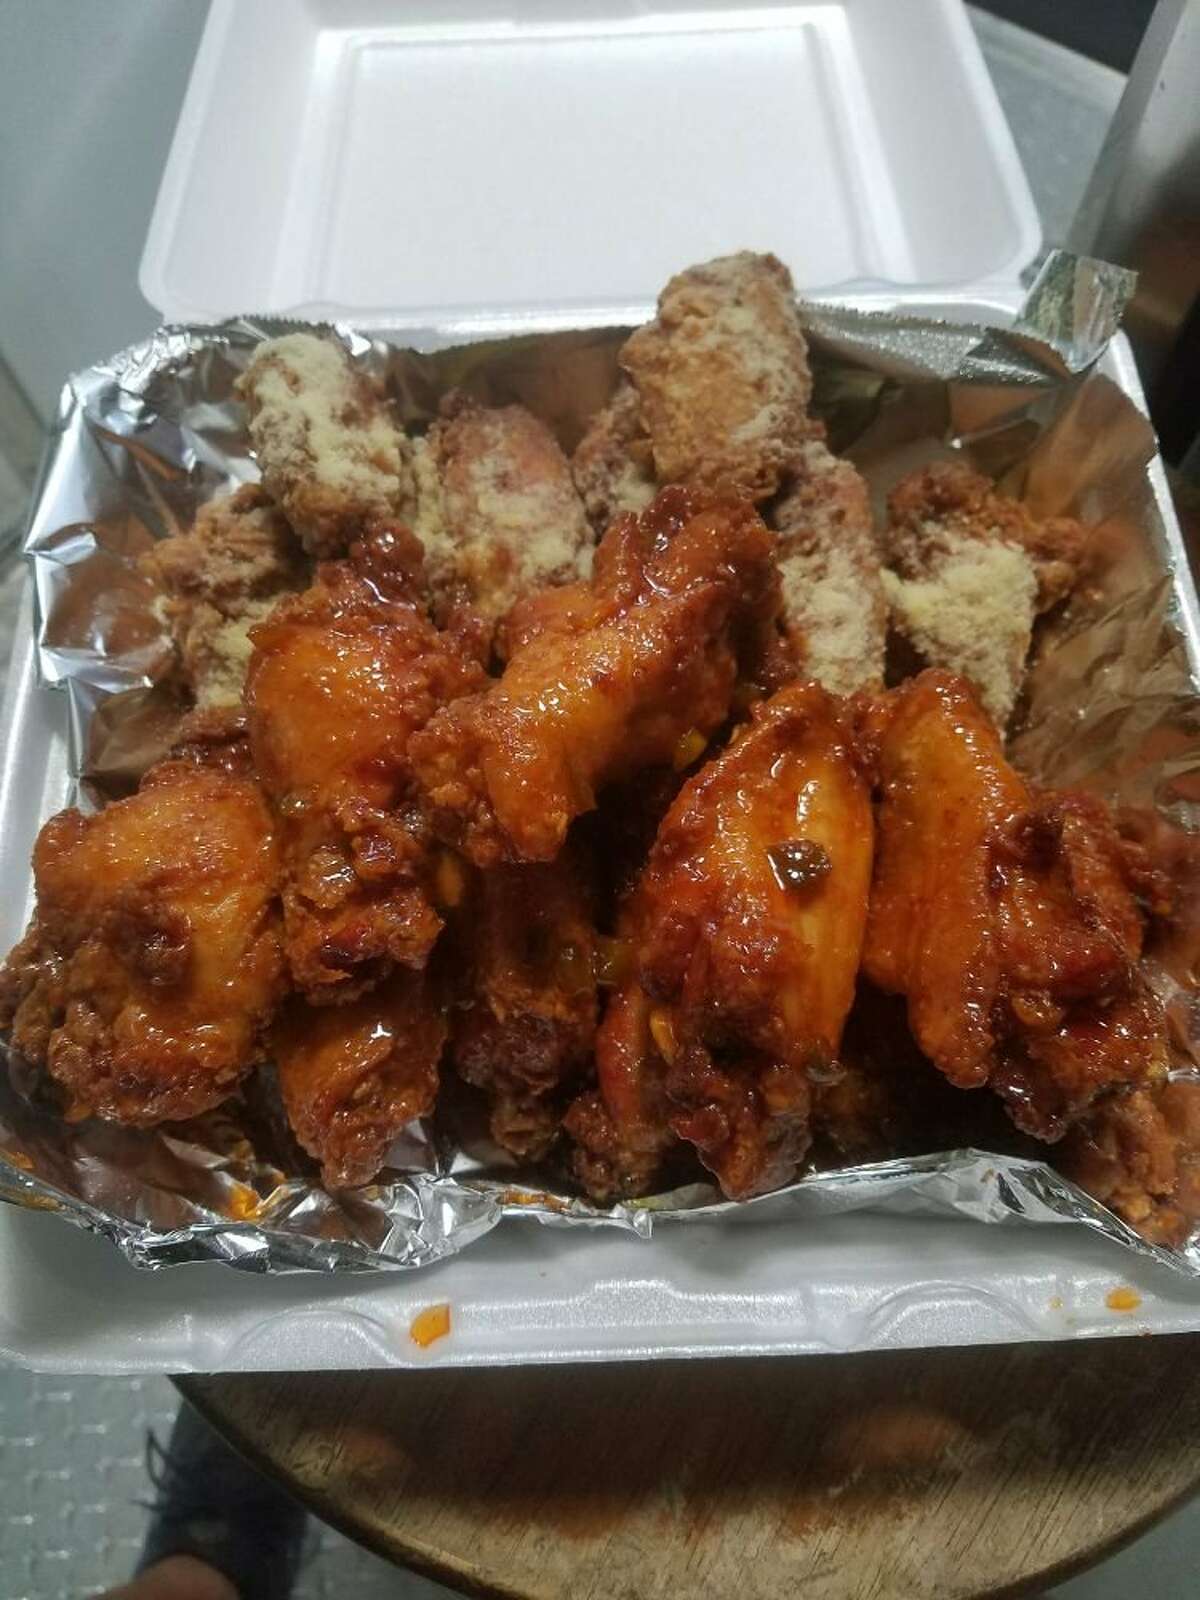 15. Pat's Wings on Wheels Address: Mobile food trucks Stars: 4 "...overall the buffalo wings were good and so were the garlic Parm except the parmesan cheese on it was really strong in my opinion."